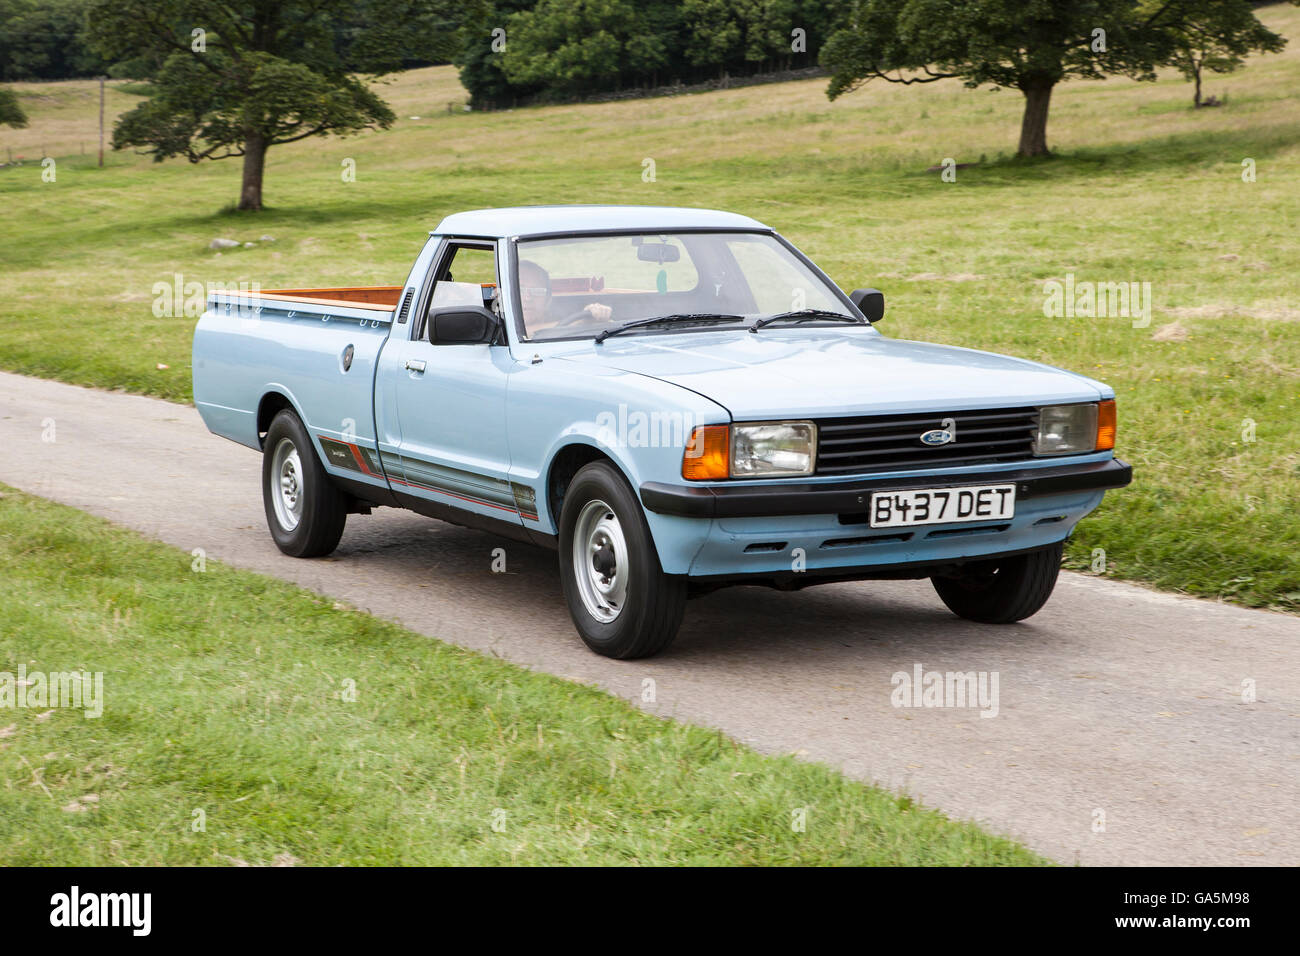 1985 blue Ford cortina van at Leighton Hall Classic Car Rally, Carnforth, Lancashire, UK.  3rd July, 2016.  The annual classic car rally takes place at the magnificent Leighton Hall in Carnforth in Lancashire.  British classic sports cars ranging from MG's to American muscle cars like the Dodge Vipers & Ford Mustangs.  The spectator event drew thousands of visitors to this scenic part of the country on the north west coast of England.  Credit:  Cernan Elias/Alamy Live News Stock Photo